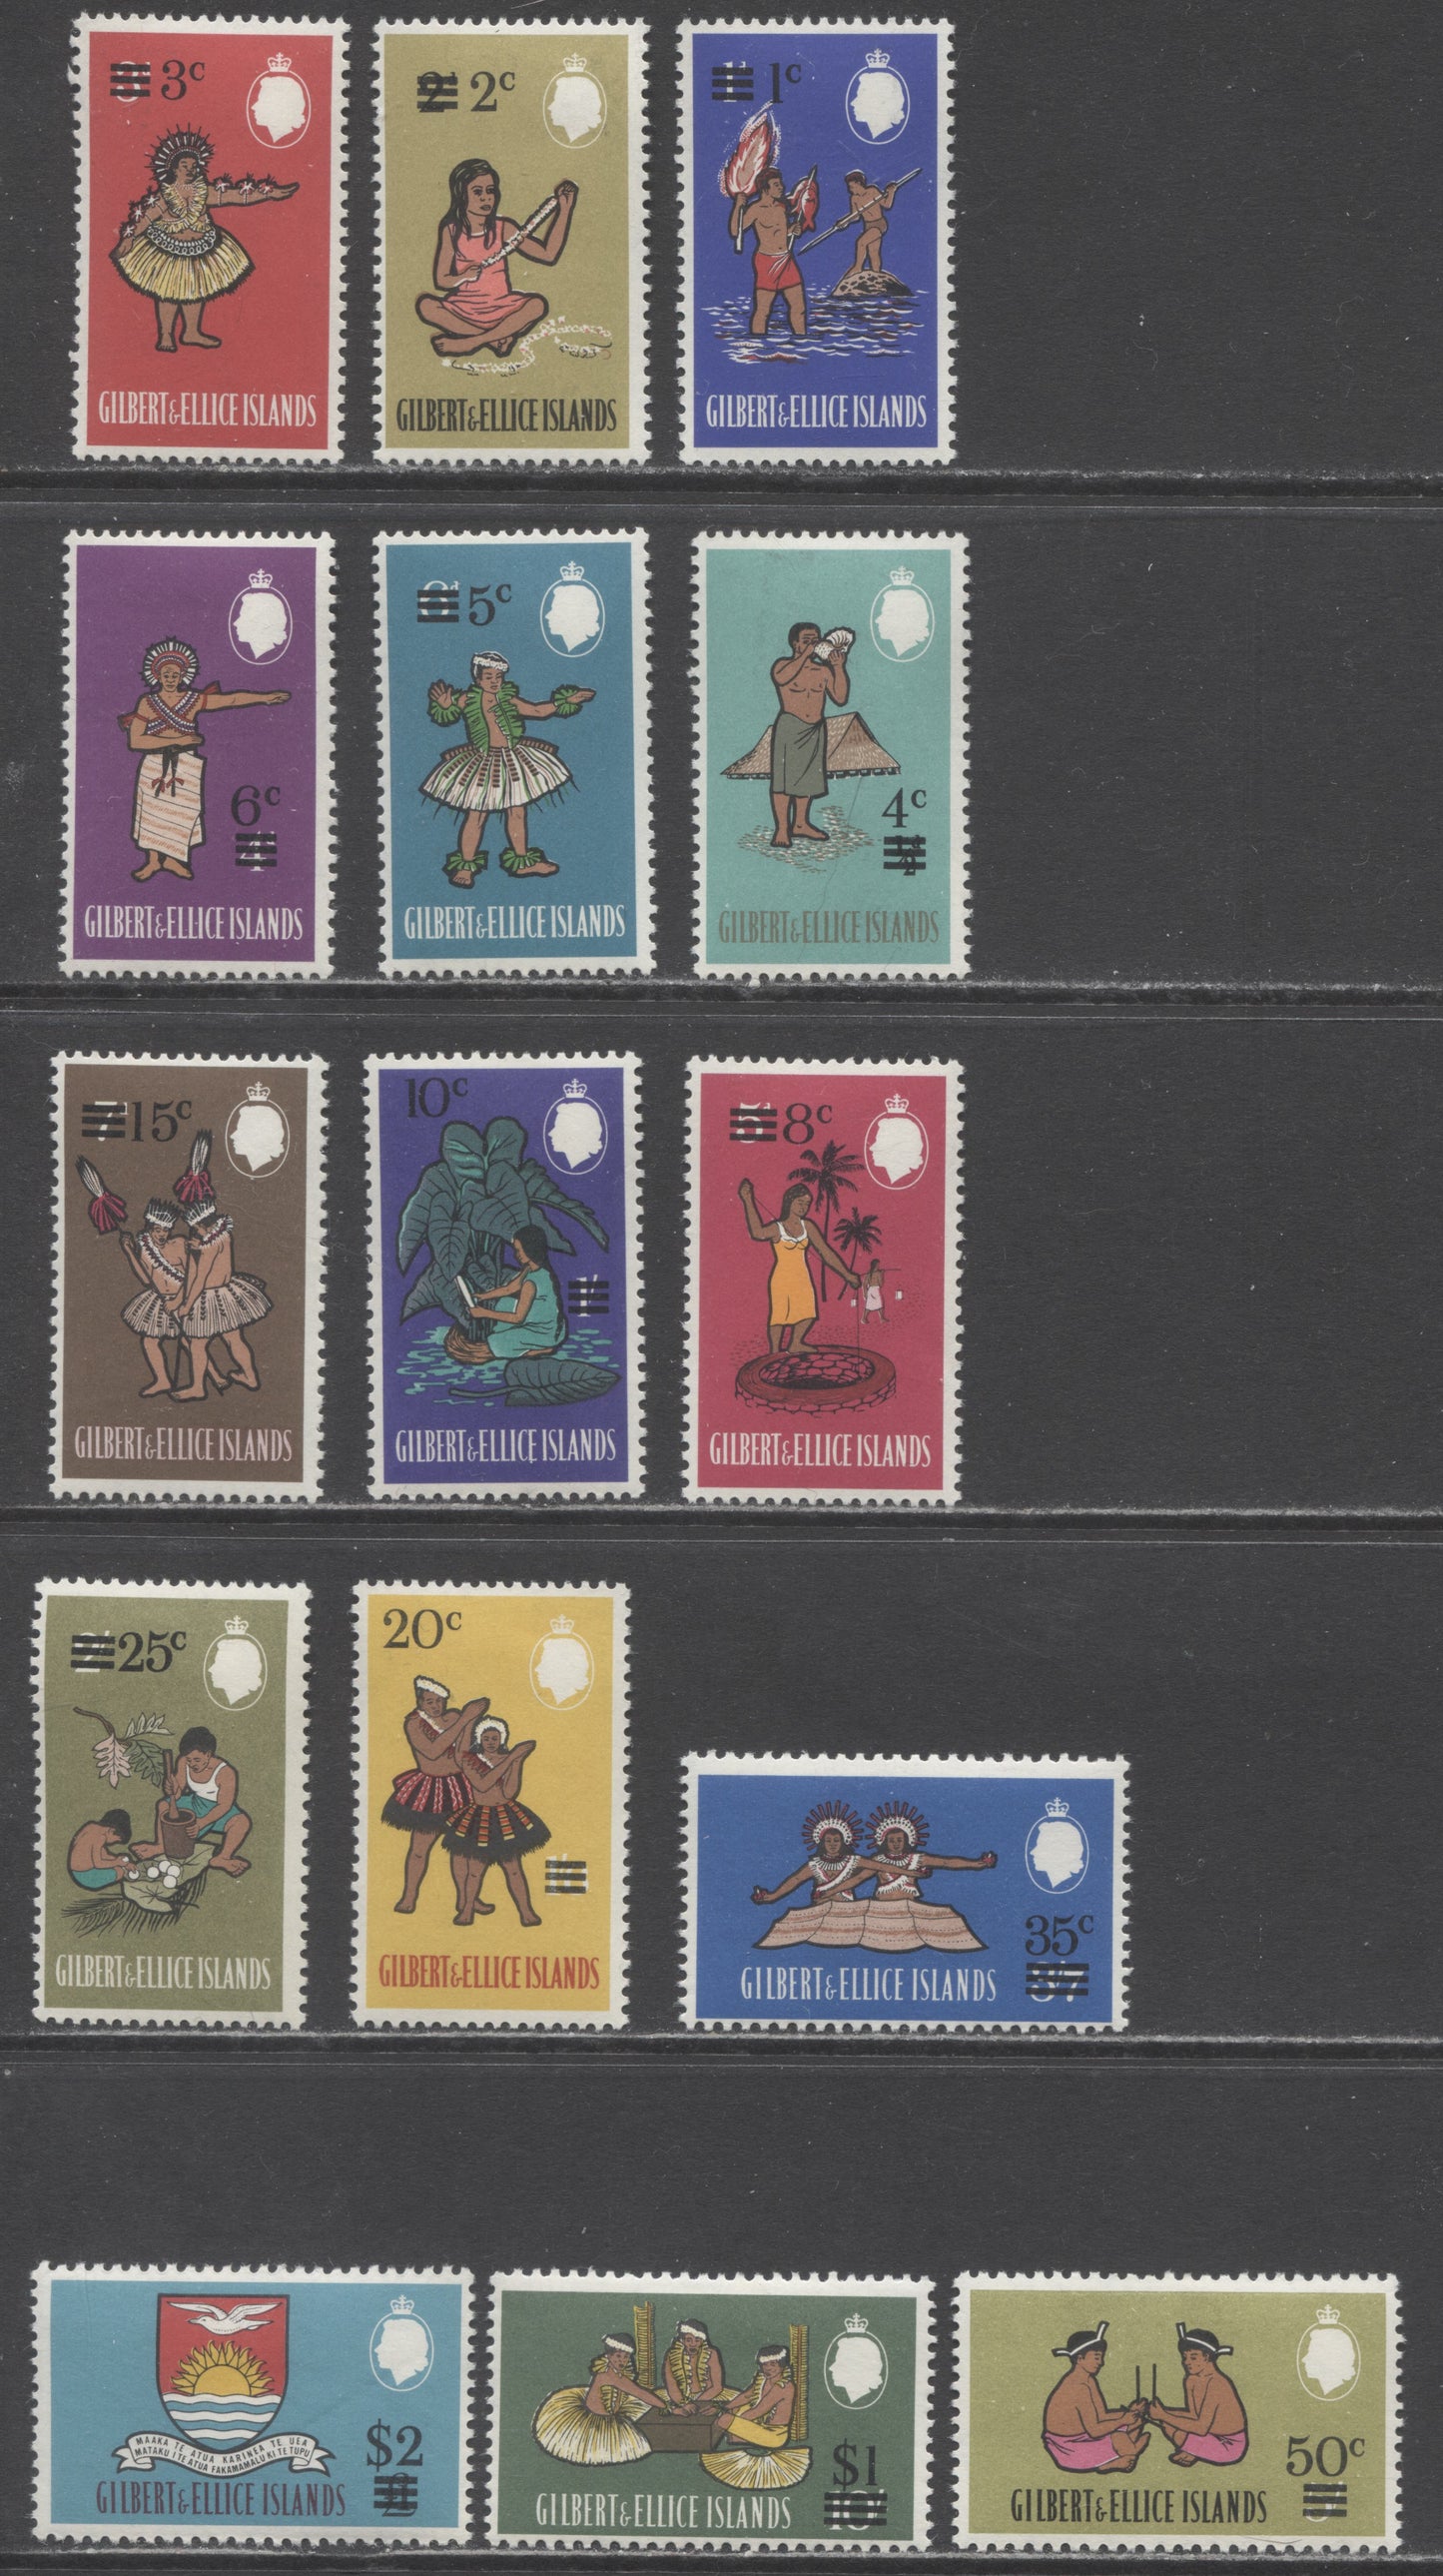 Lot 5 Gilbert & Ellice Islands SC#110-124 1966 Surcharged Pre-Decimal Pictorial Definitives, 15 VFOG Singles, Click on Listing to See ALL Pictures, Estimated Value $5